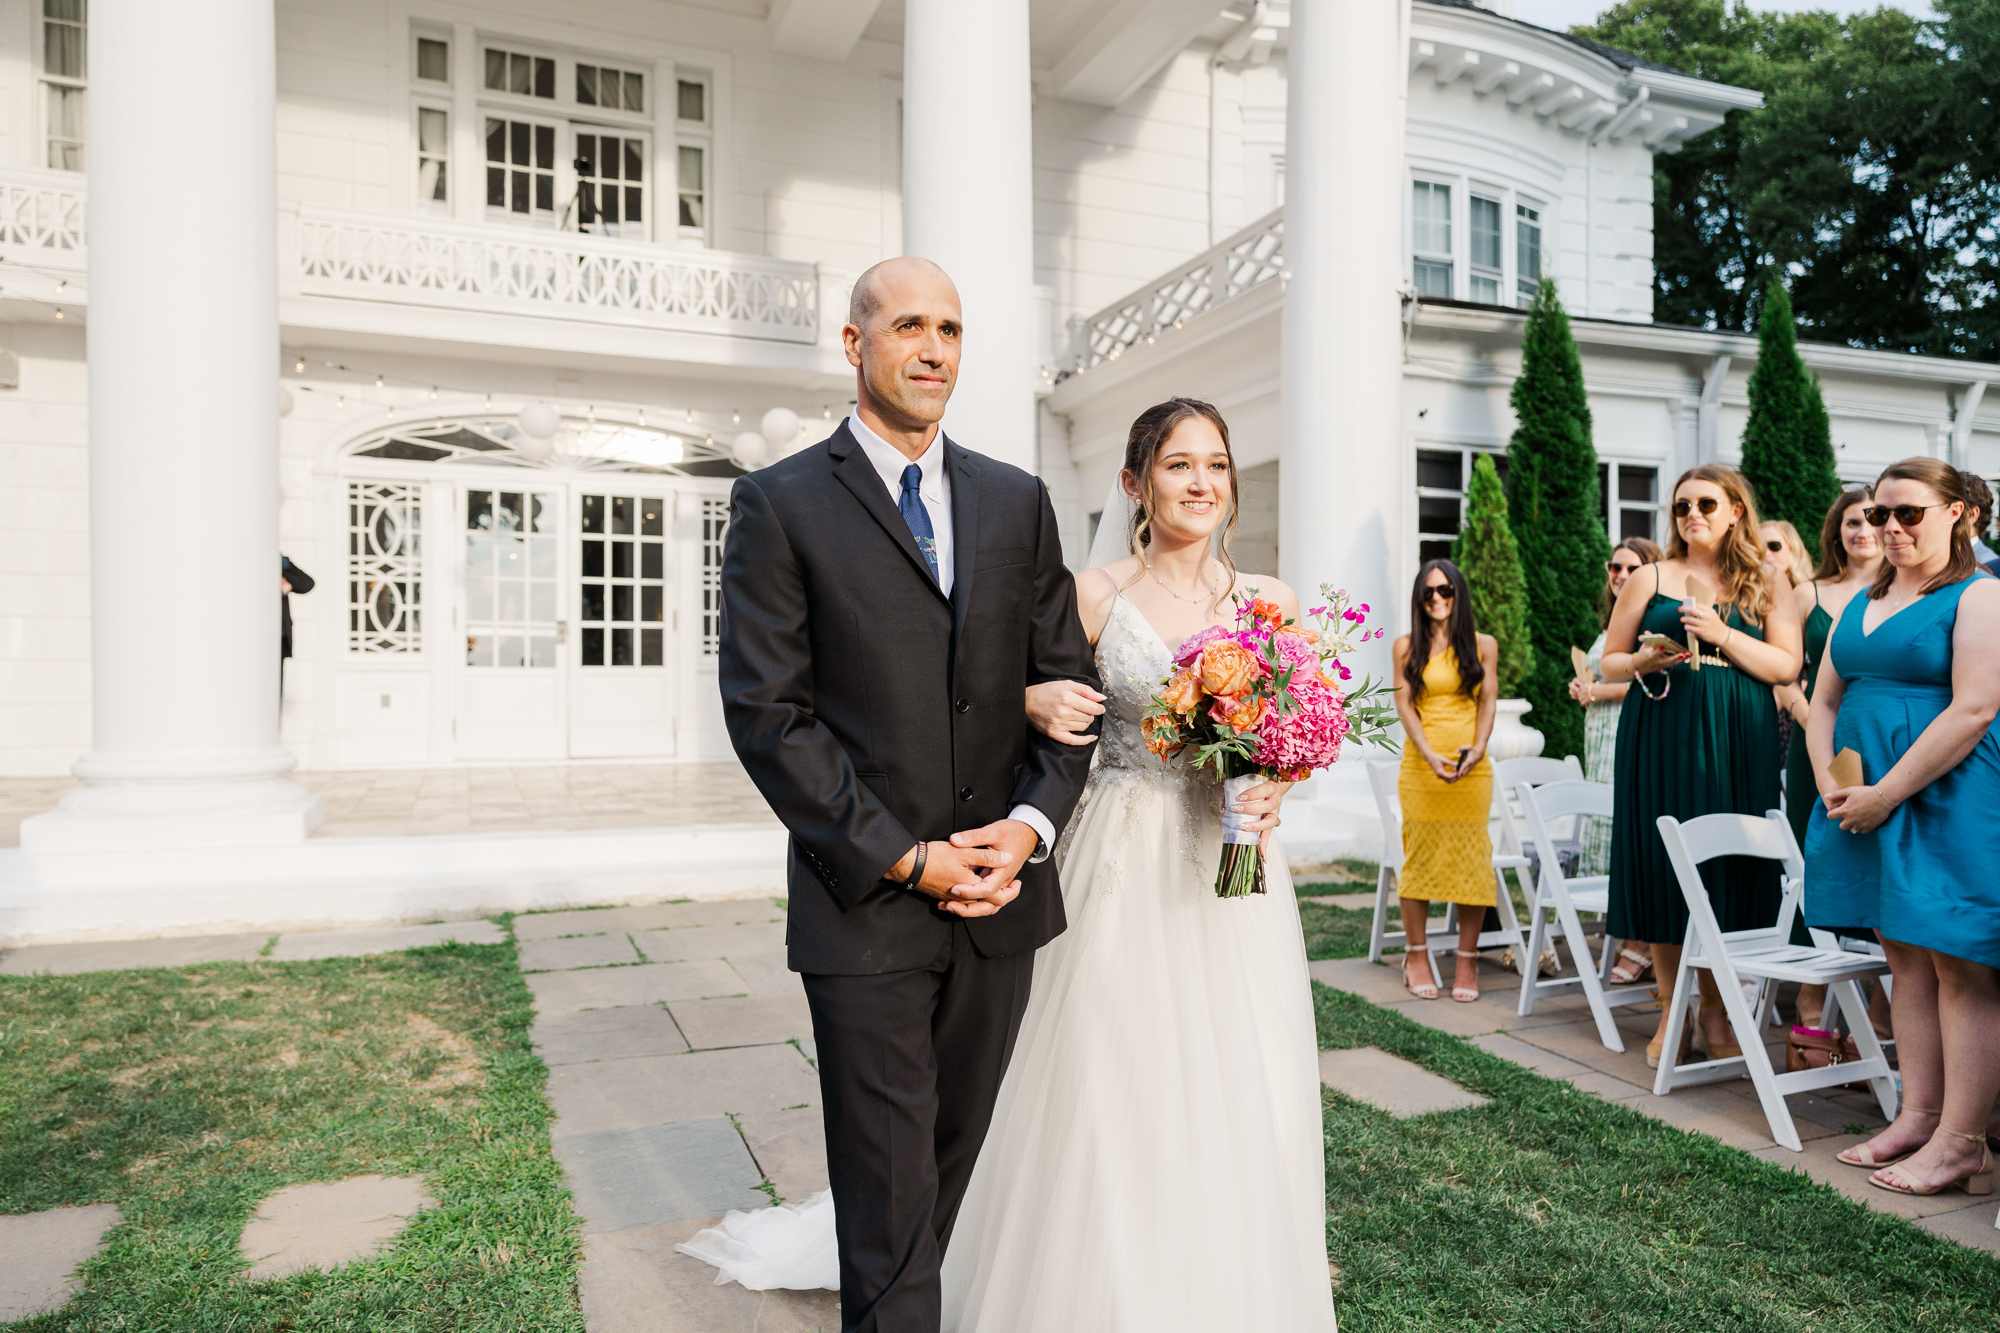 Amazing Wedding at Briarcliff Manor in Summertime